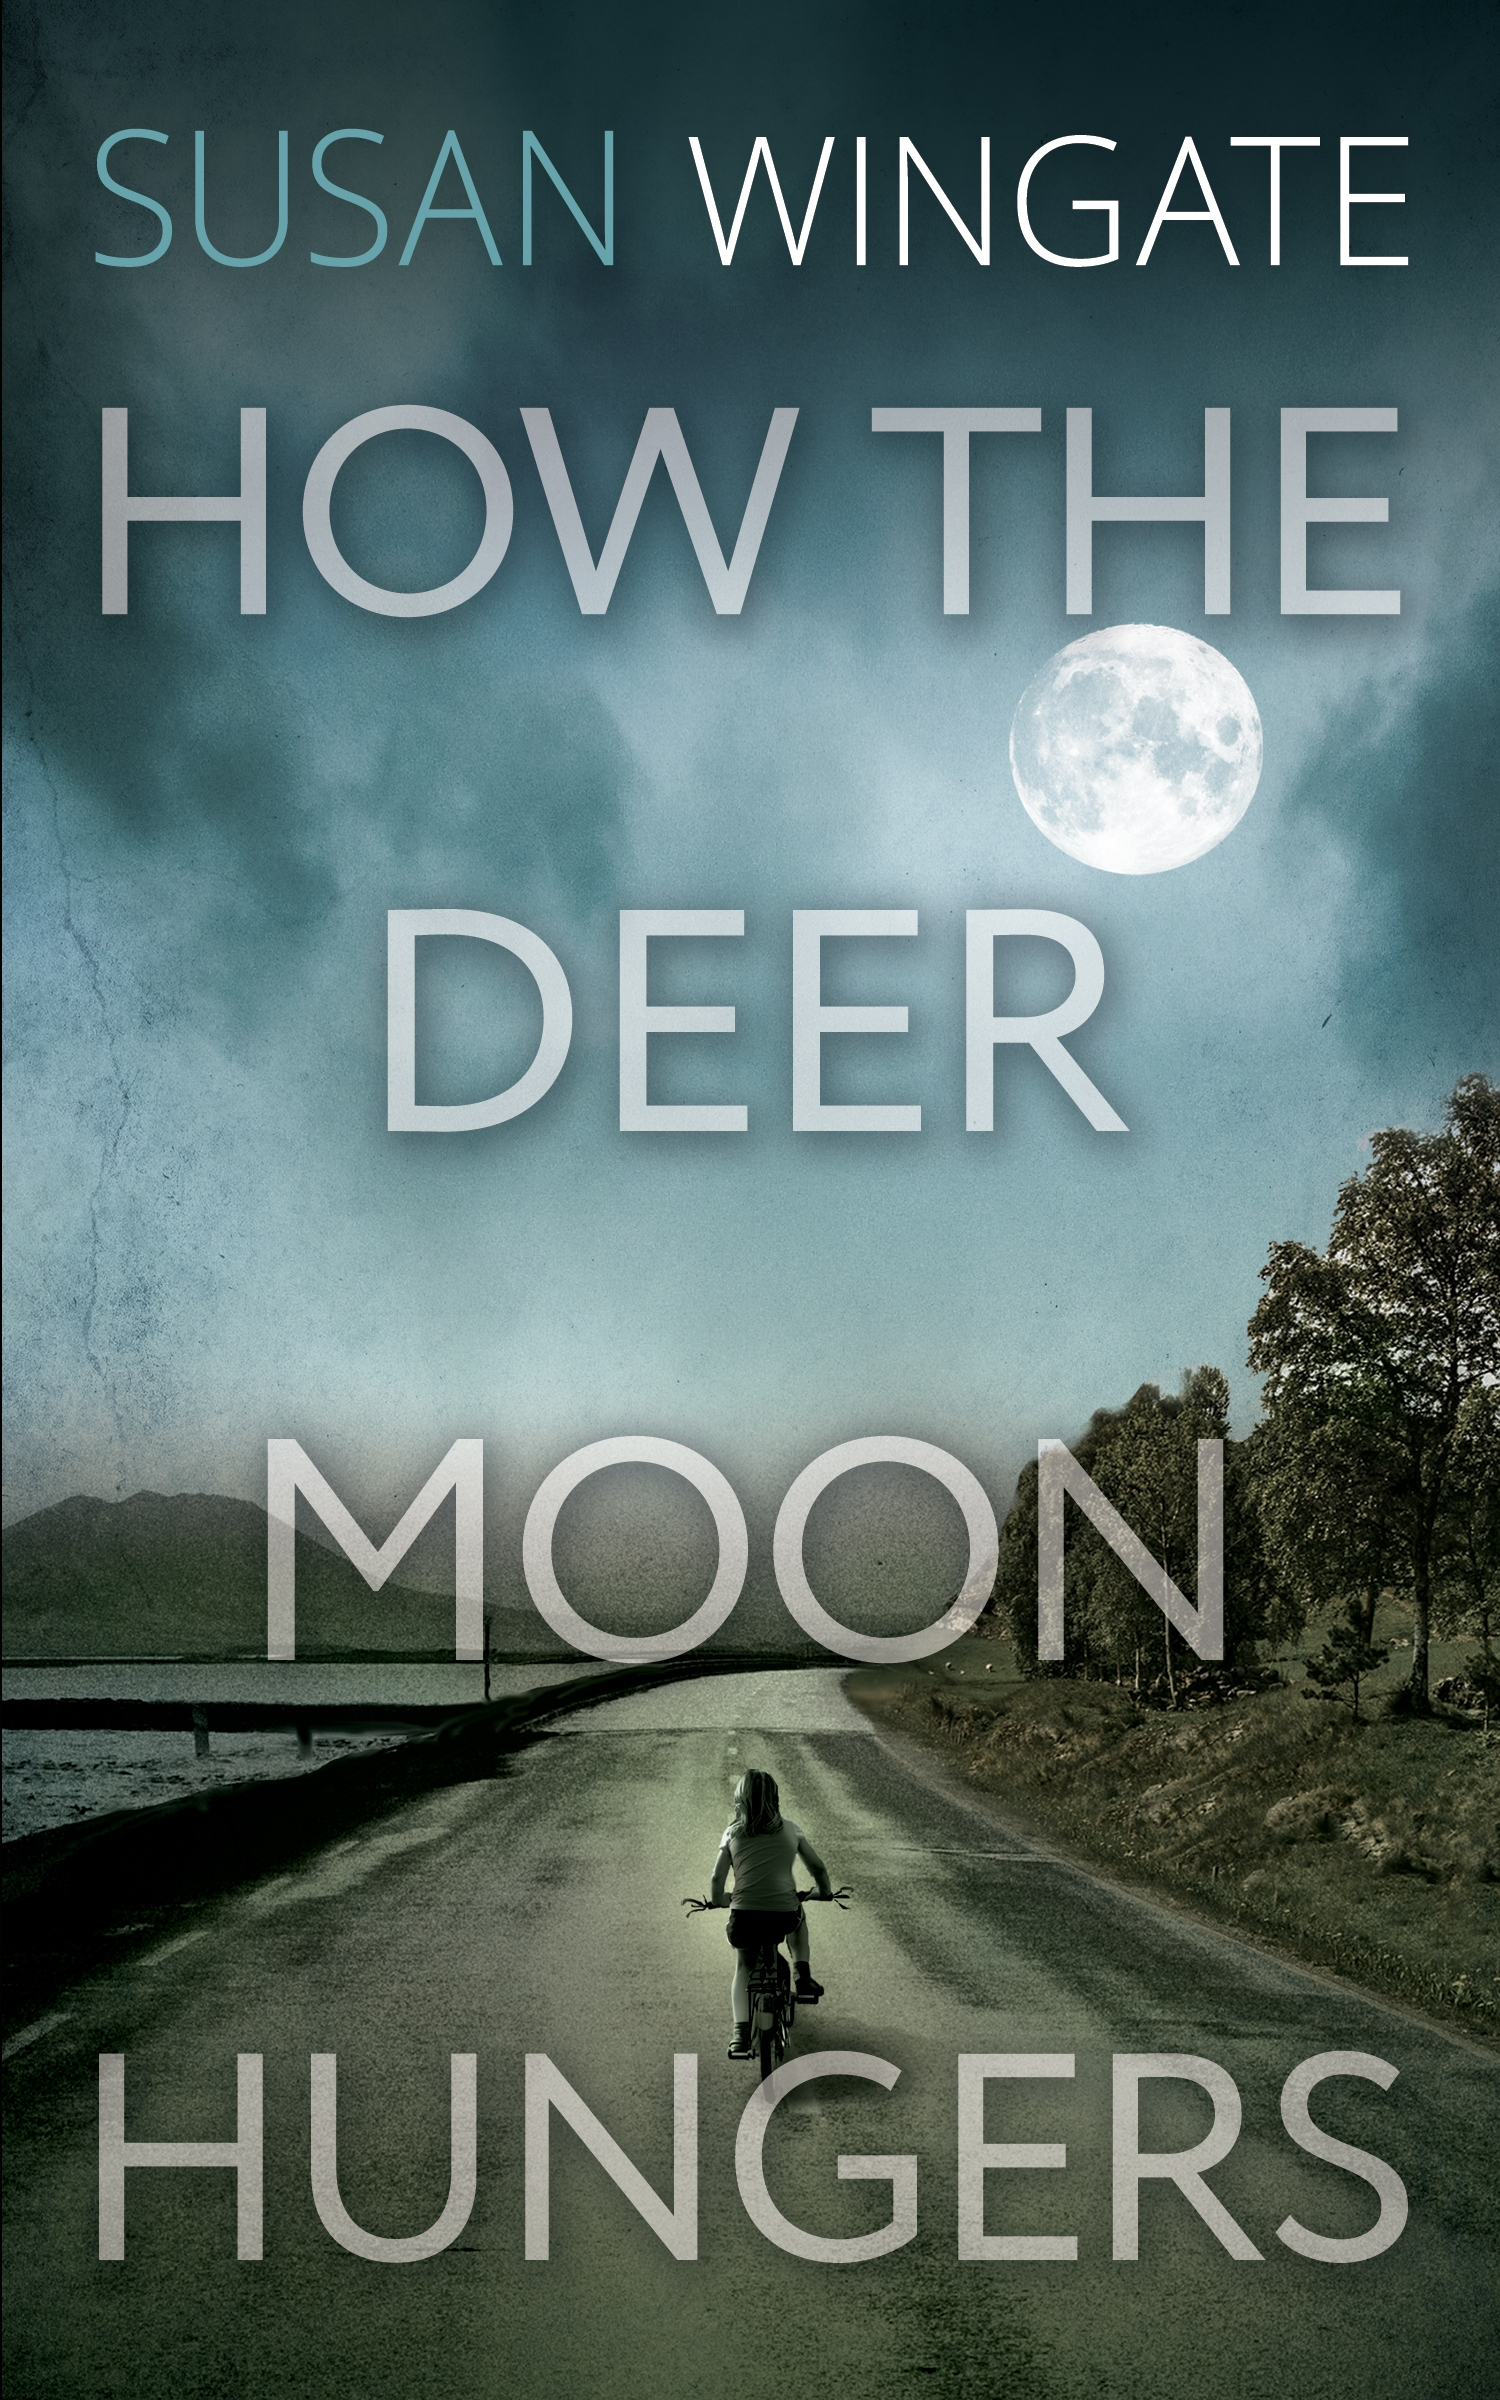 How the Deer Moon Hungers